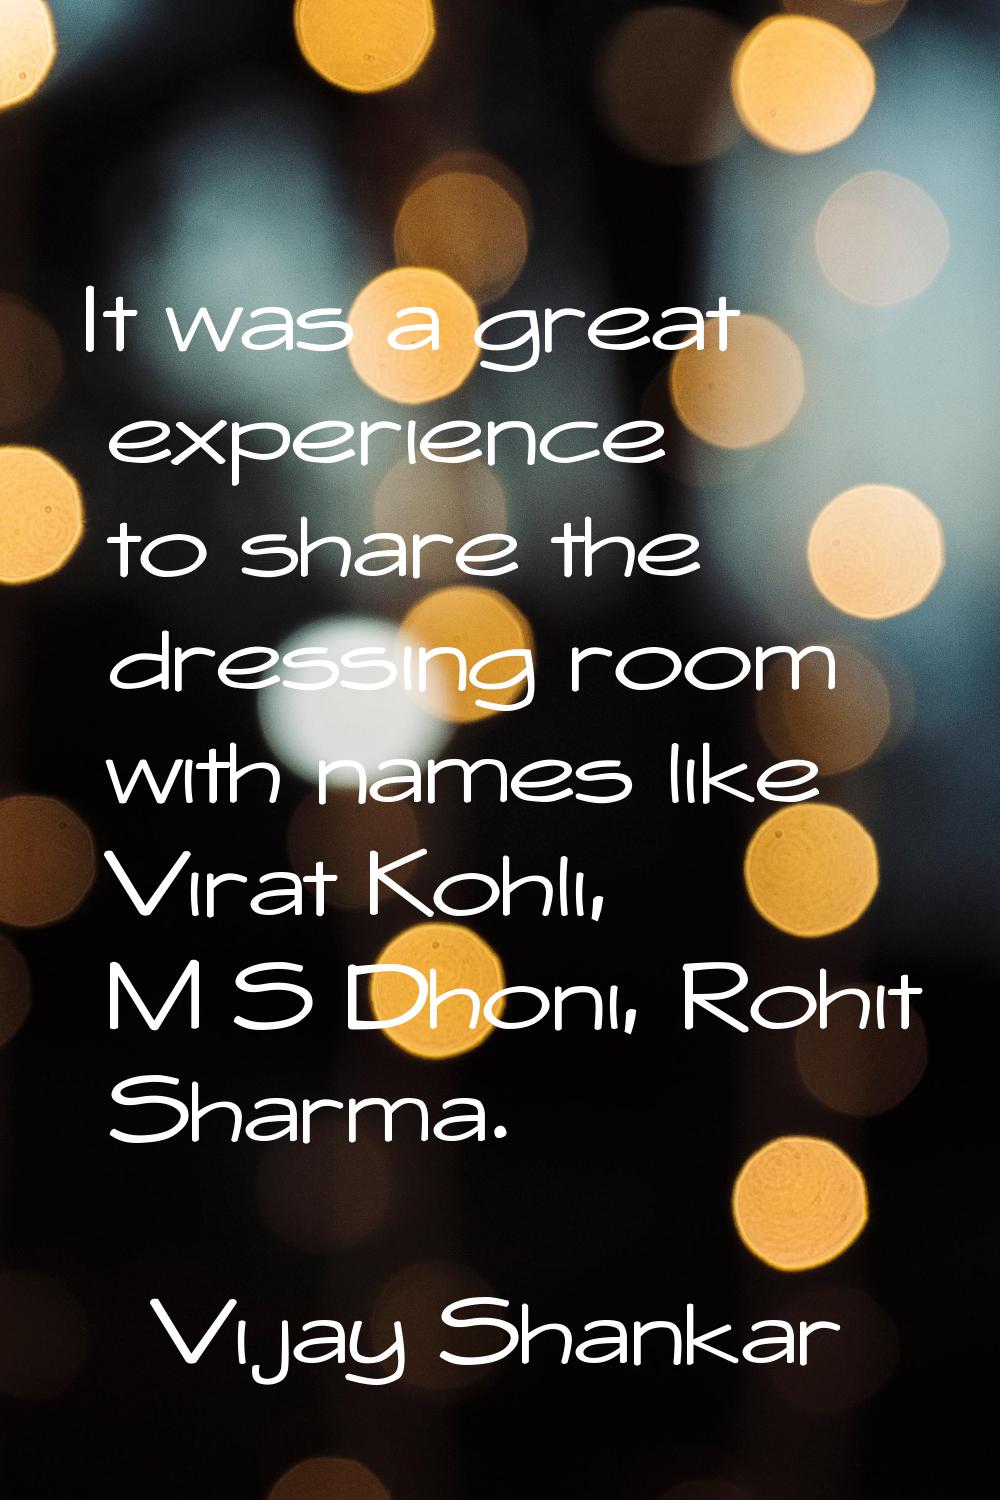 It was a great experience to share the dressing room with names like Virat Kohli, M S Dhoni, Rohit 